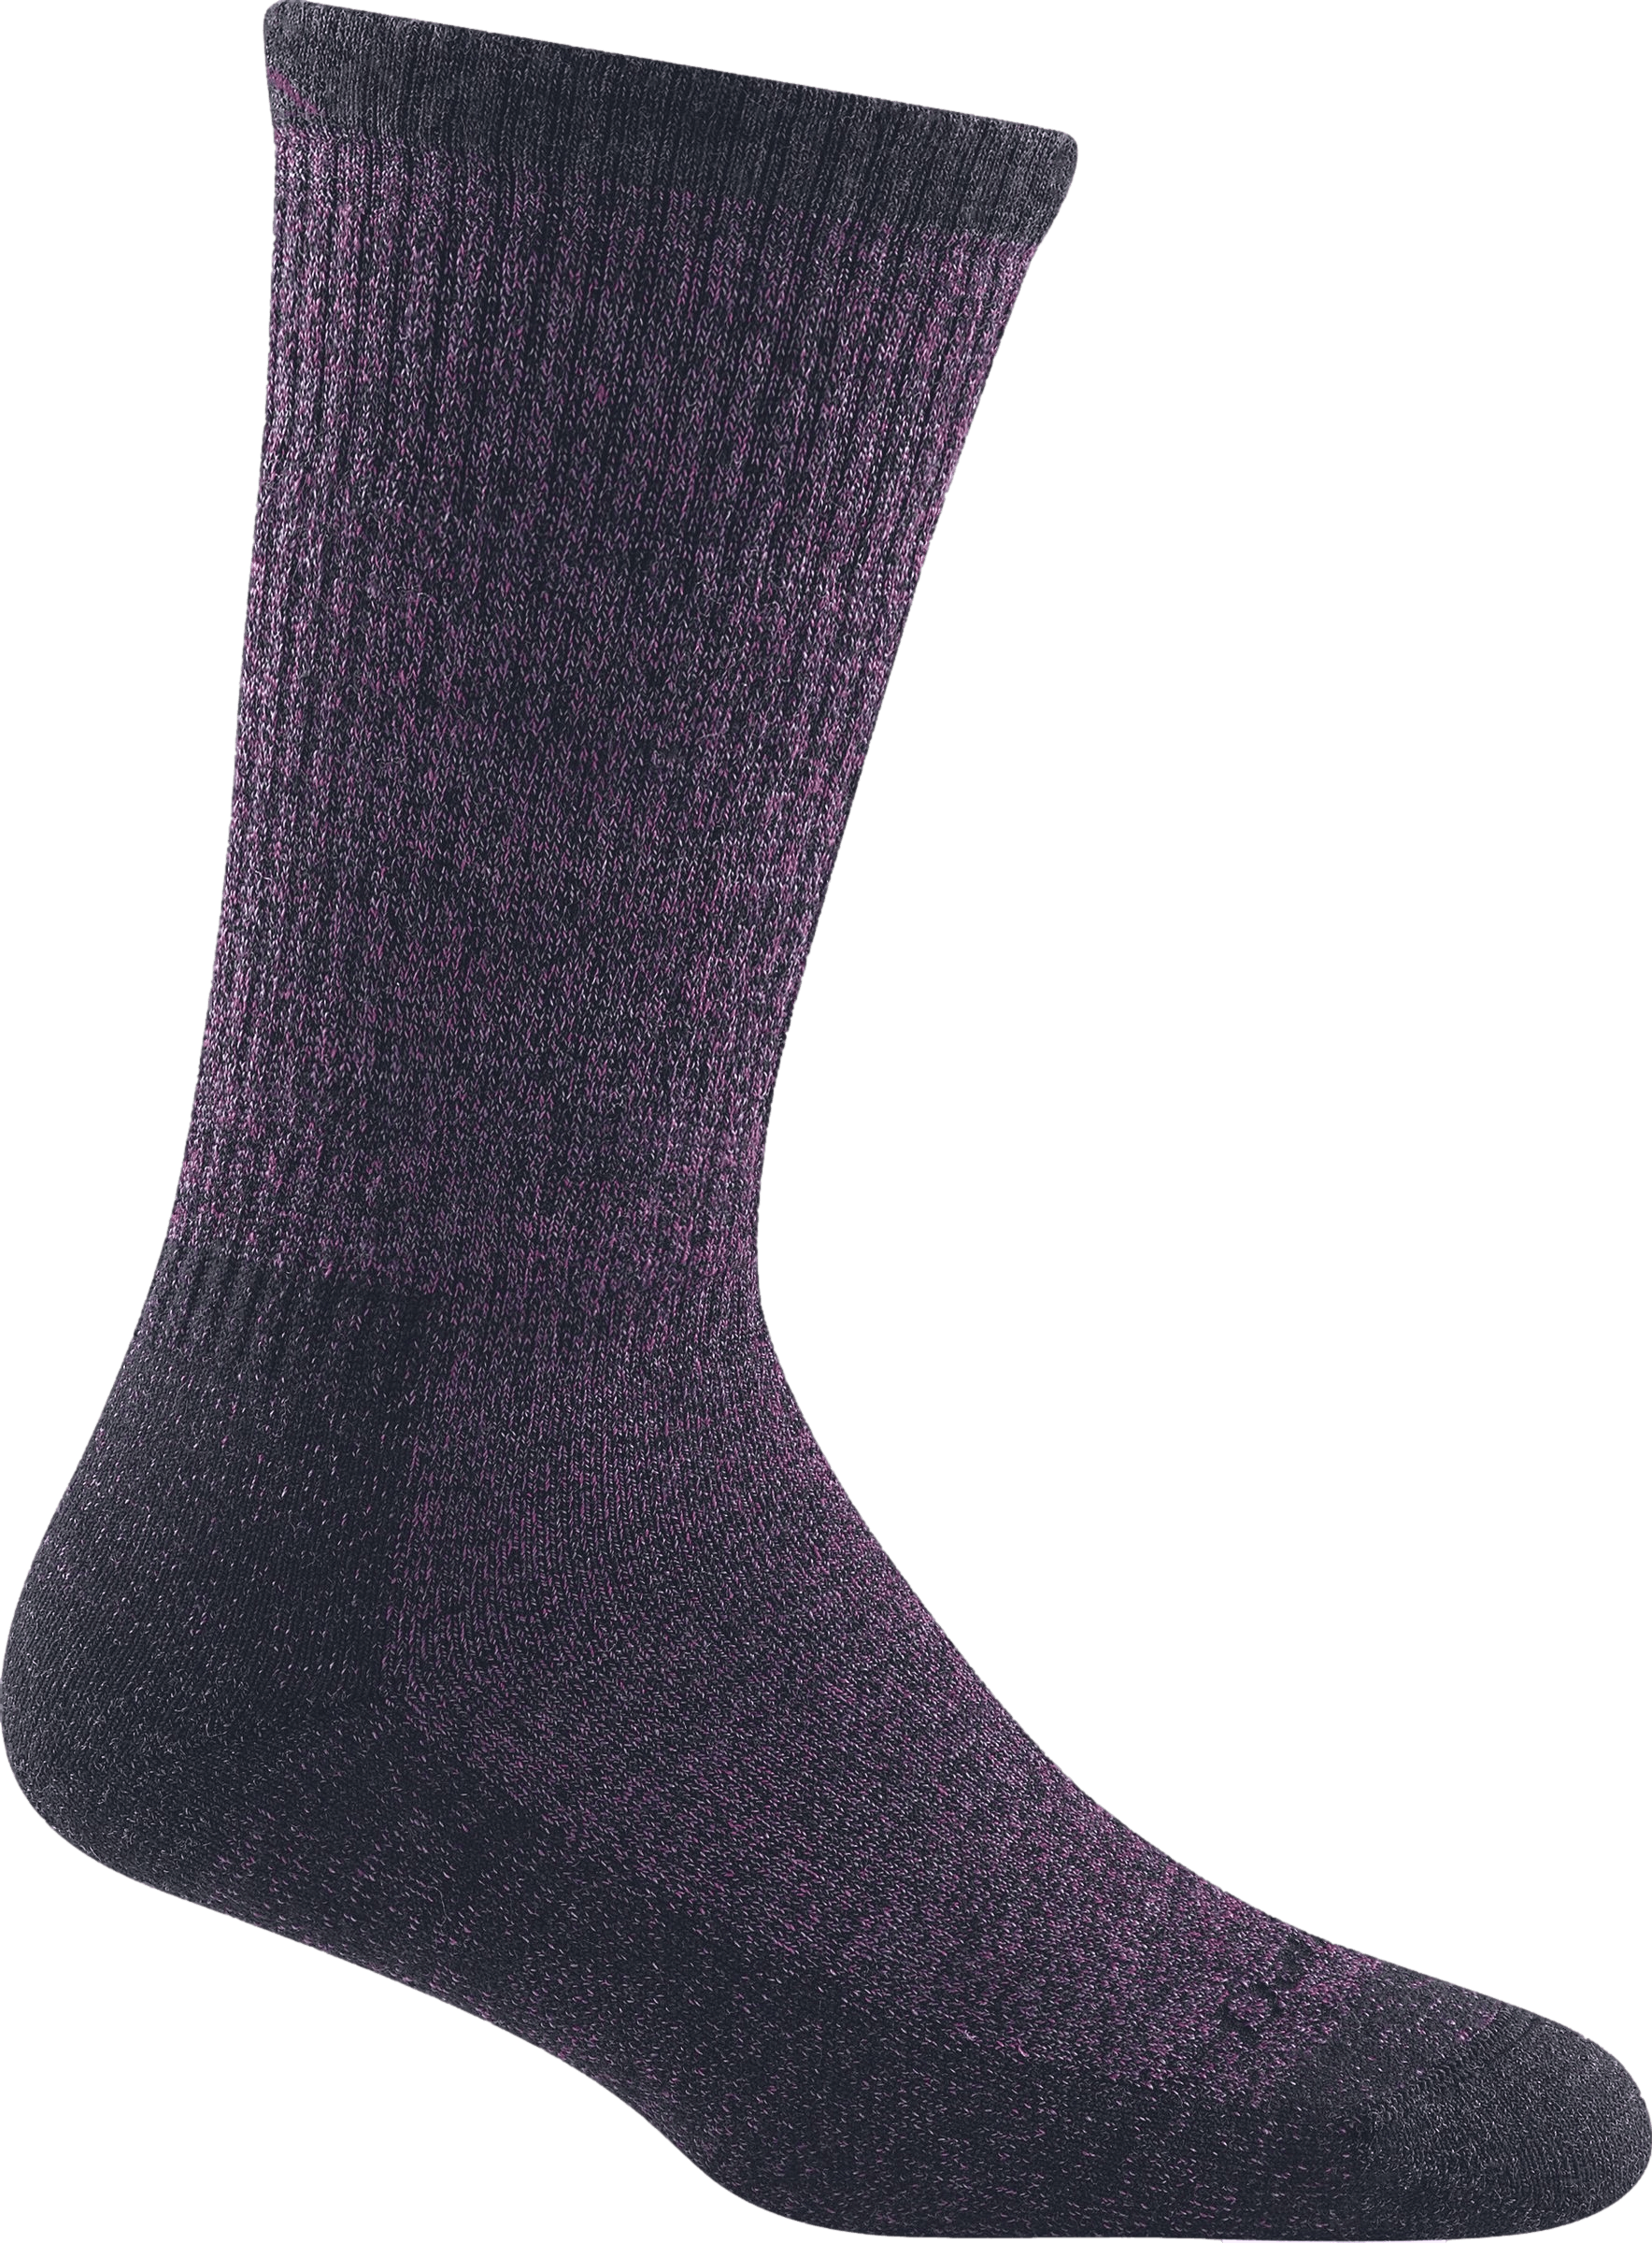 Darn Tough Women's Nomad Boot Midweight Hiking Socks with Full Cushion